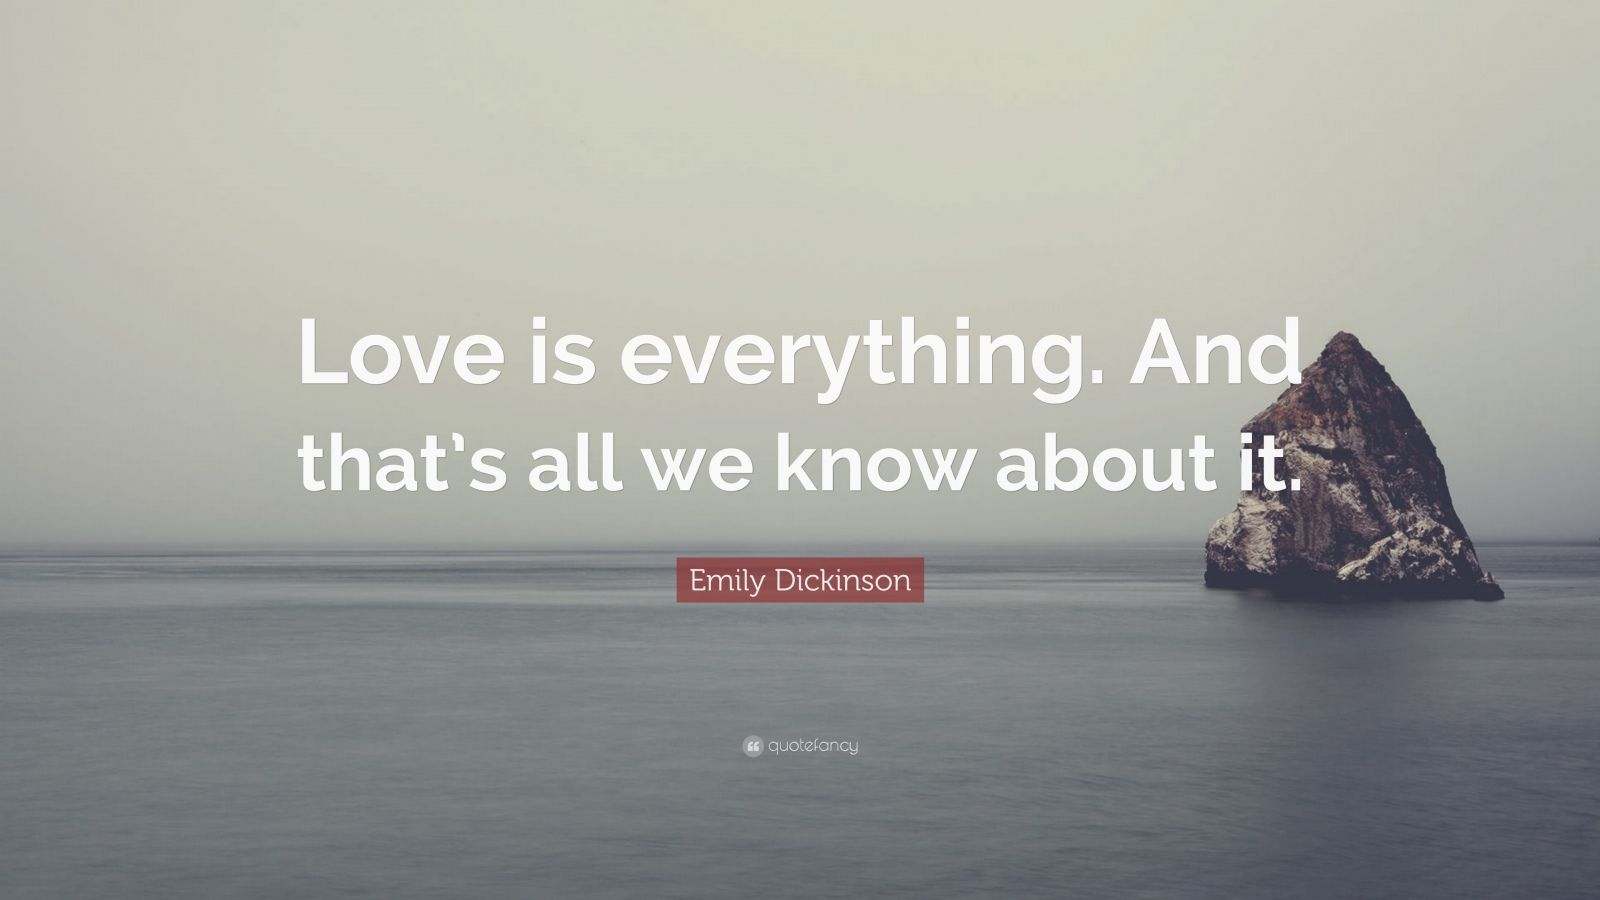 Emily Dickinson Quote: “Love is everything. And that’s all we know ...